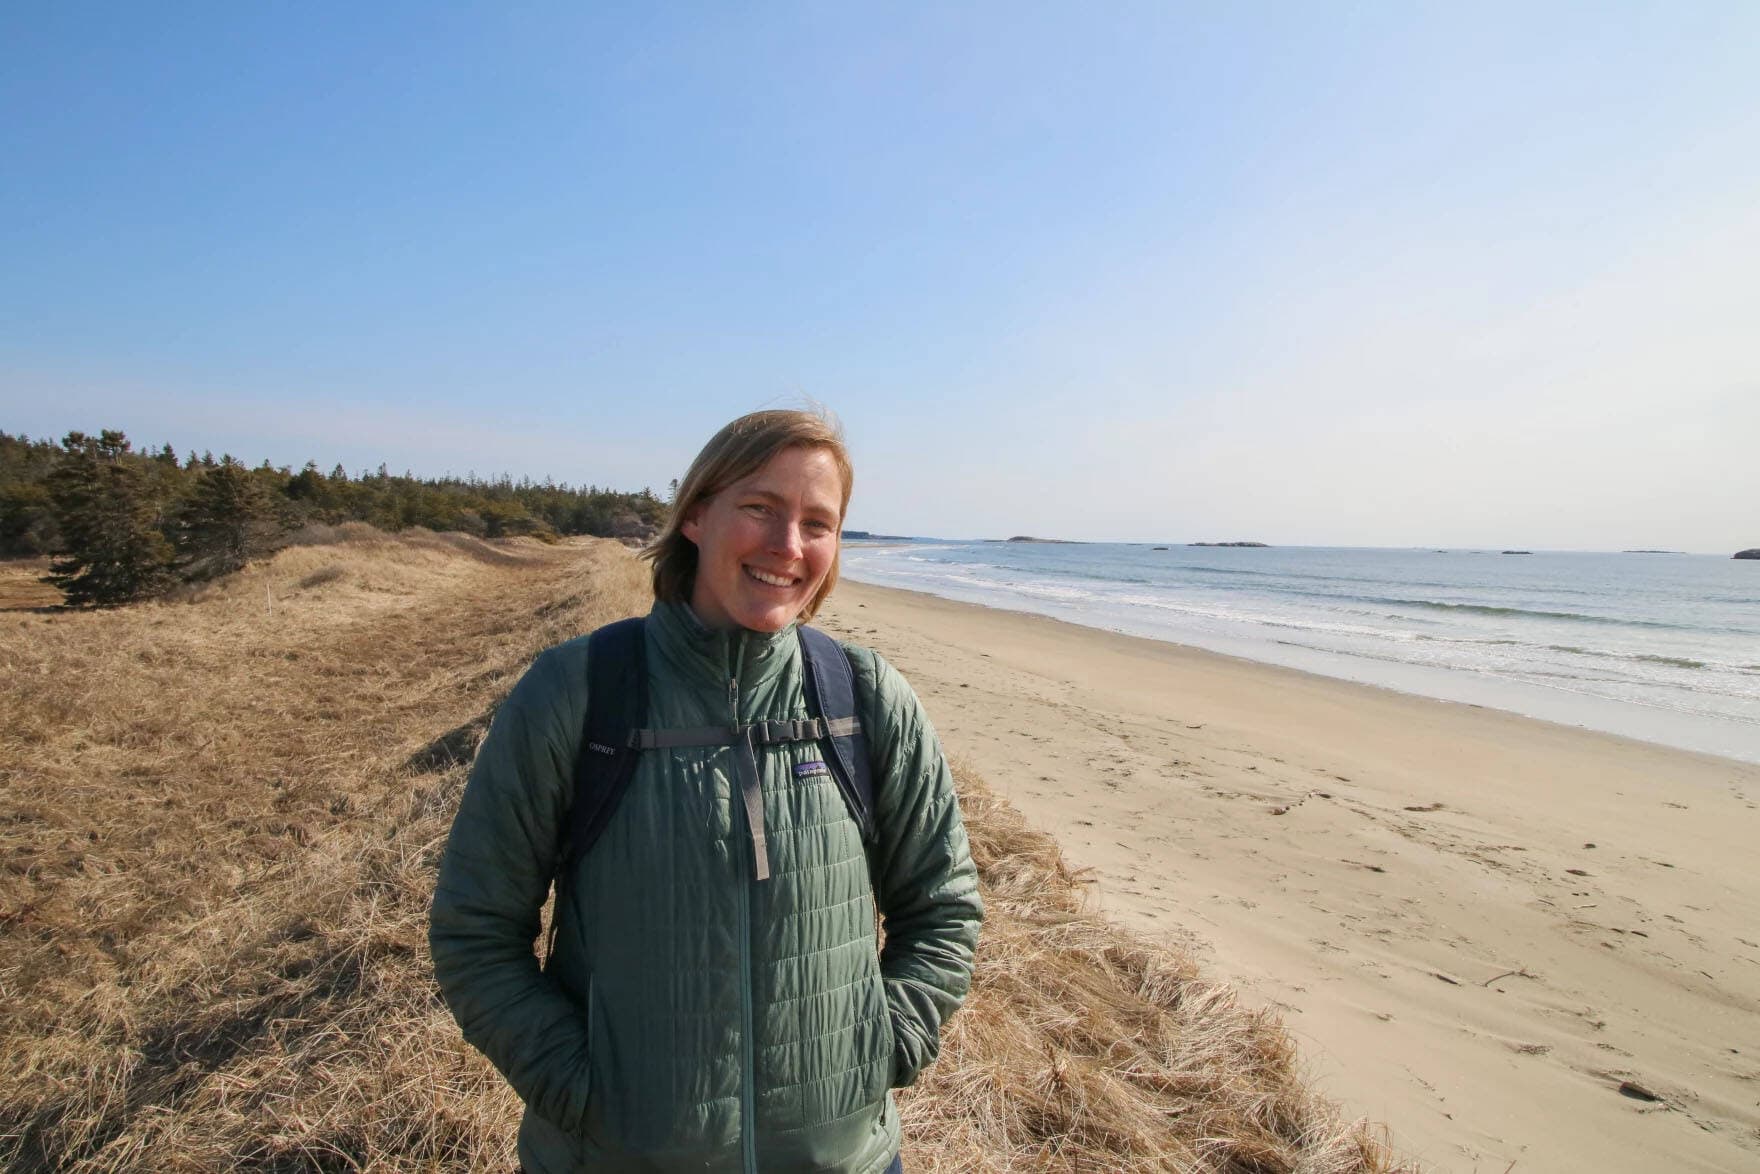 Caitlin Cleaver, director of the Bates-Morse Mountain Conservation Area, at Seawall Beach. The healthy dunes with pitch pines are increasingly rare as Maine's beaches become developed. (Murray Carpenter/Maine Public)